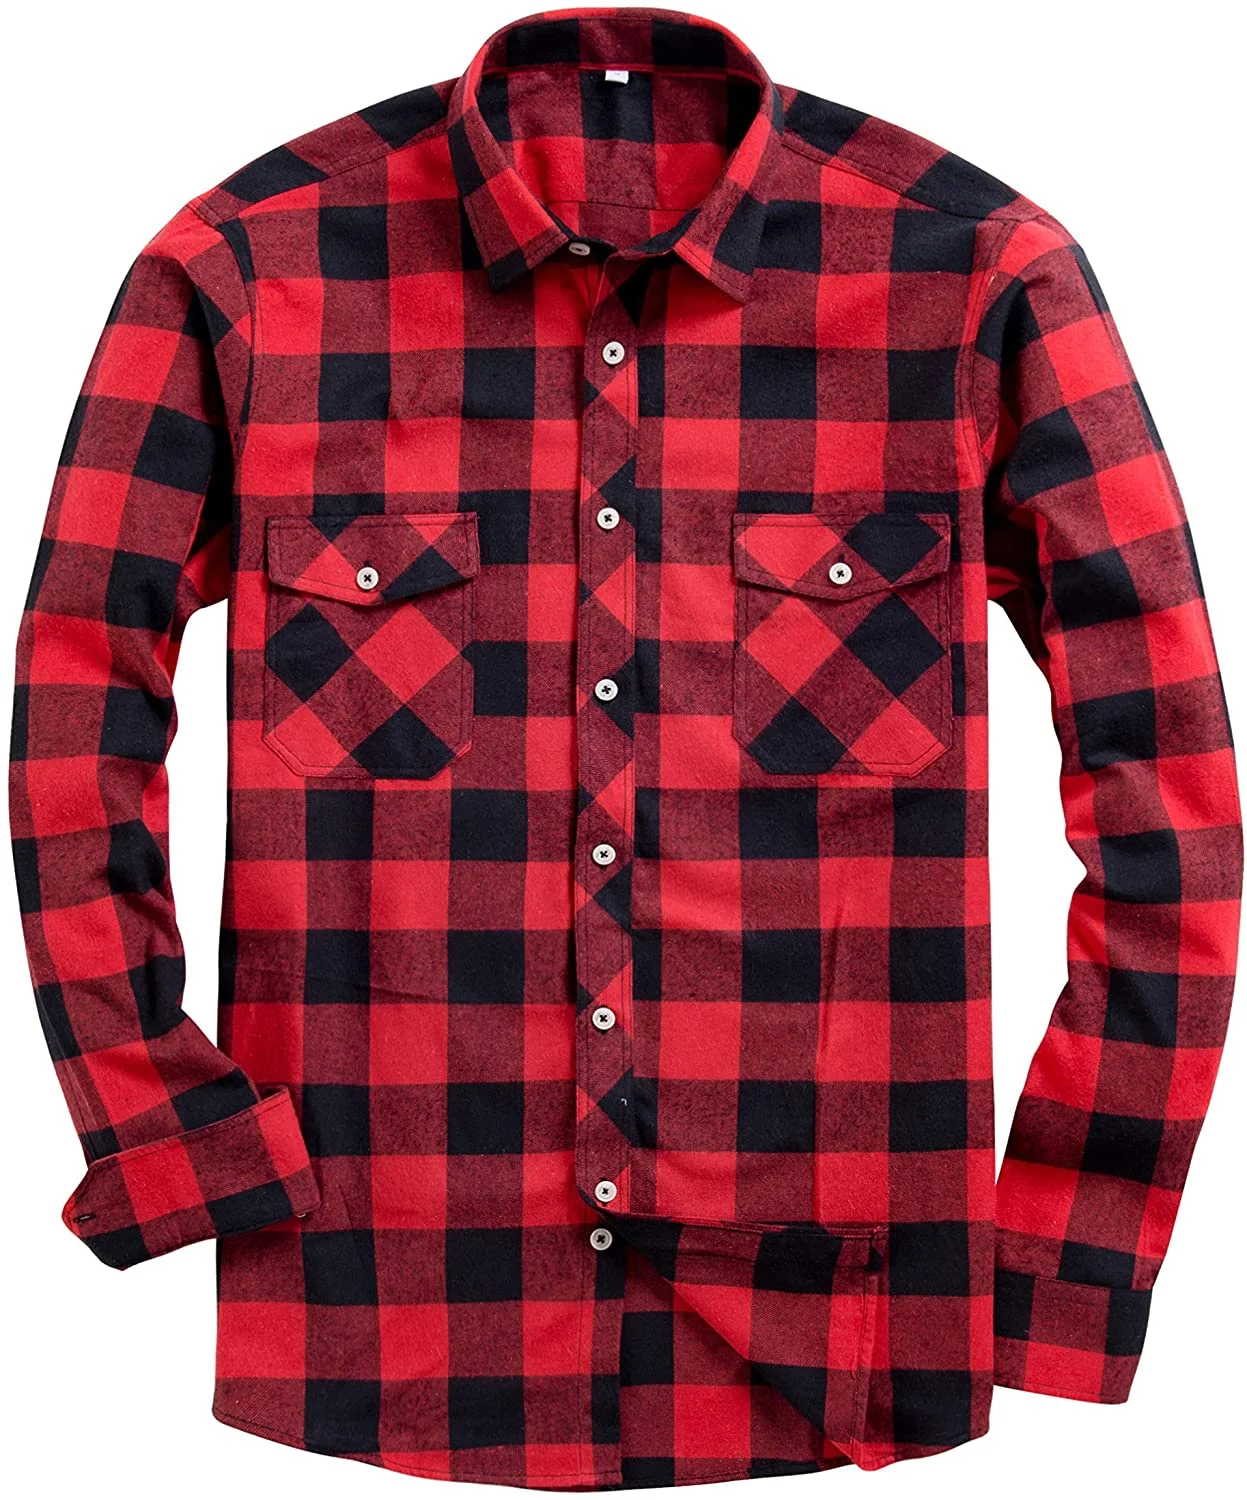 Wholesale Mens Button Down Regular Fit Long Sleeve Plaid Flannel Casual Shirts Manufacturers In Bangladesh Factory Supplier